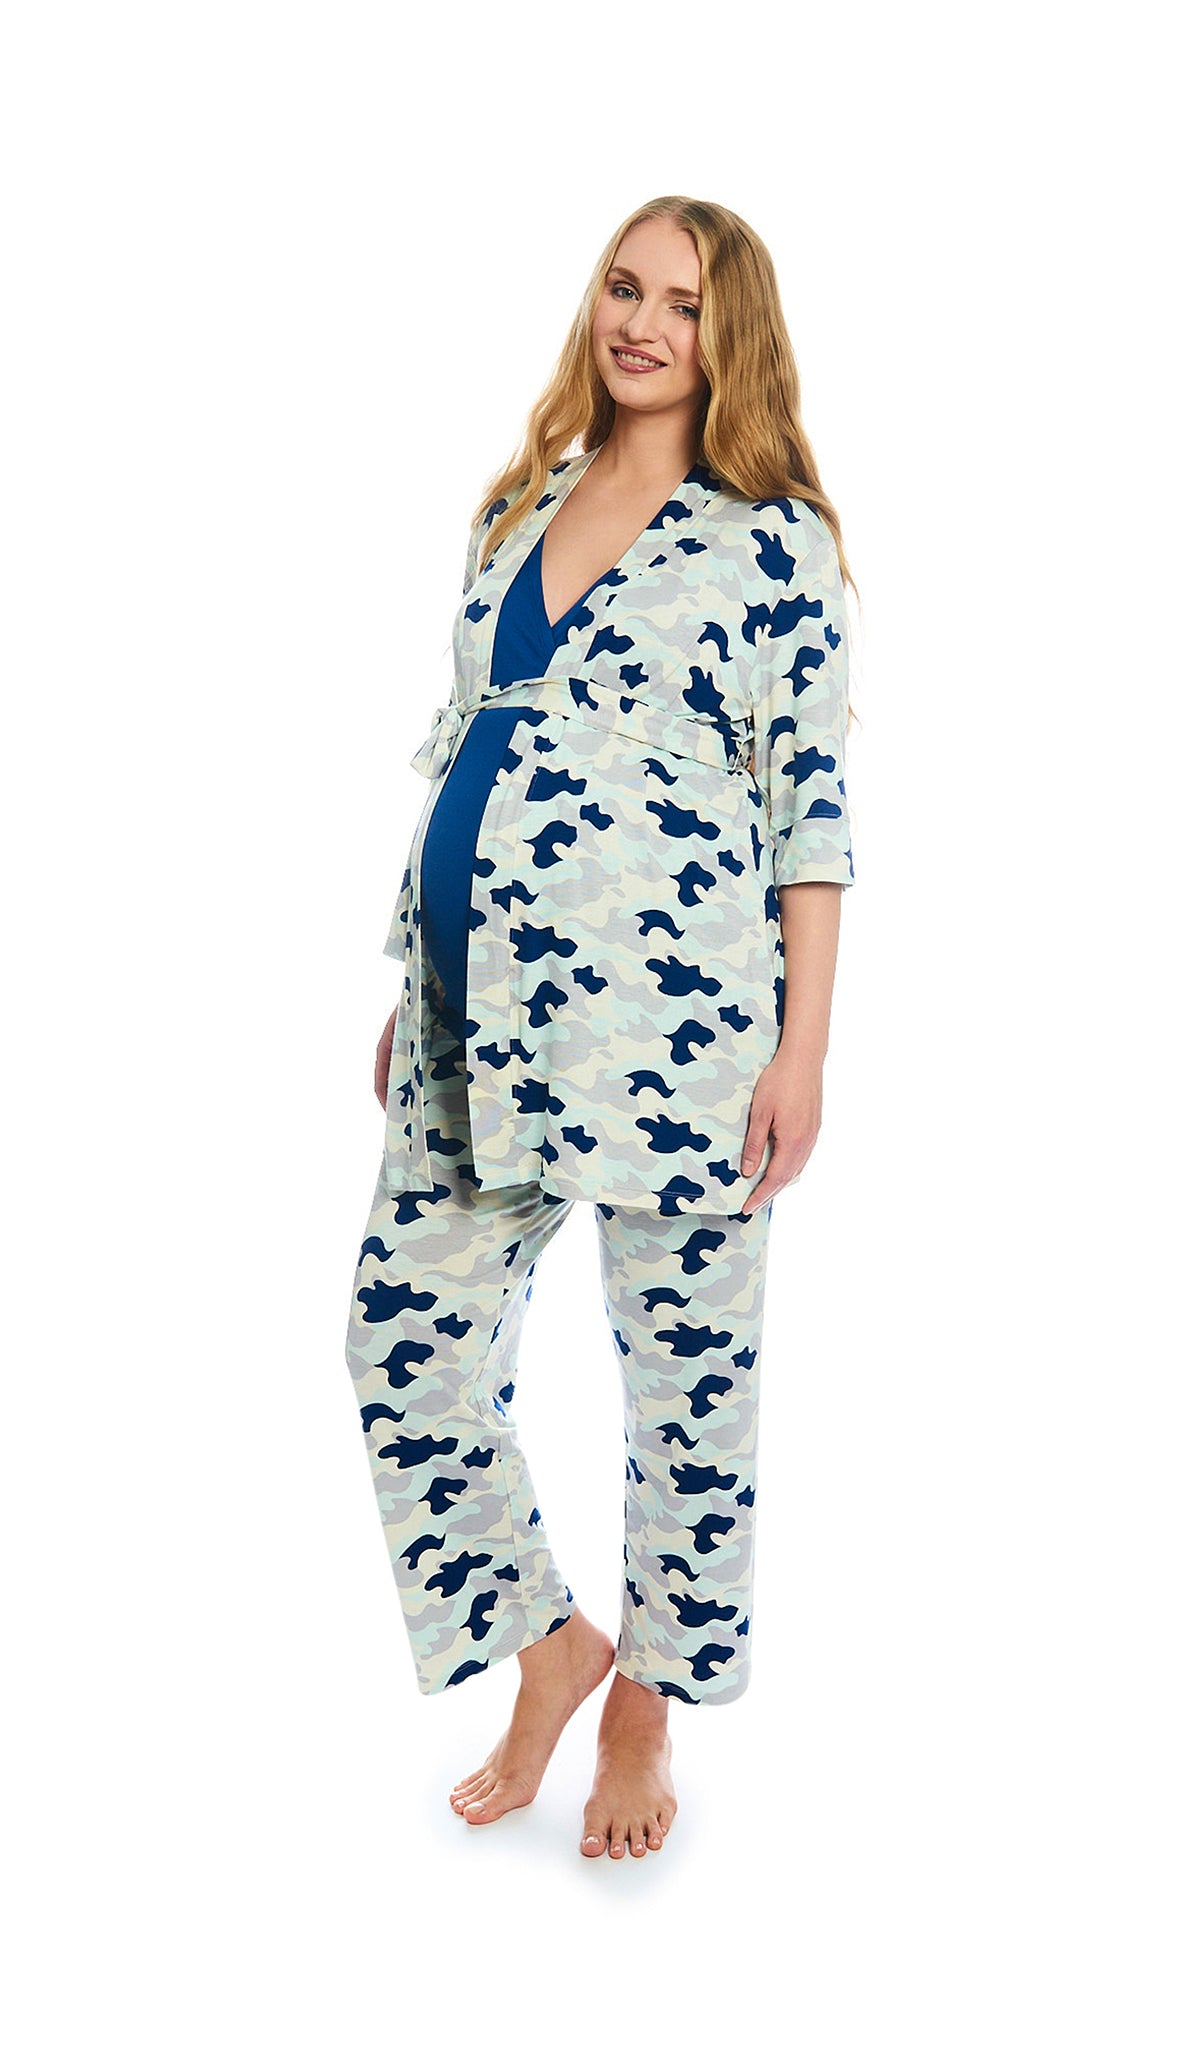 Camo Analise 3-Piece Set. Pregnant woman wearing 3/4 sleeve robe, tank top and pant.